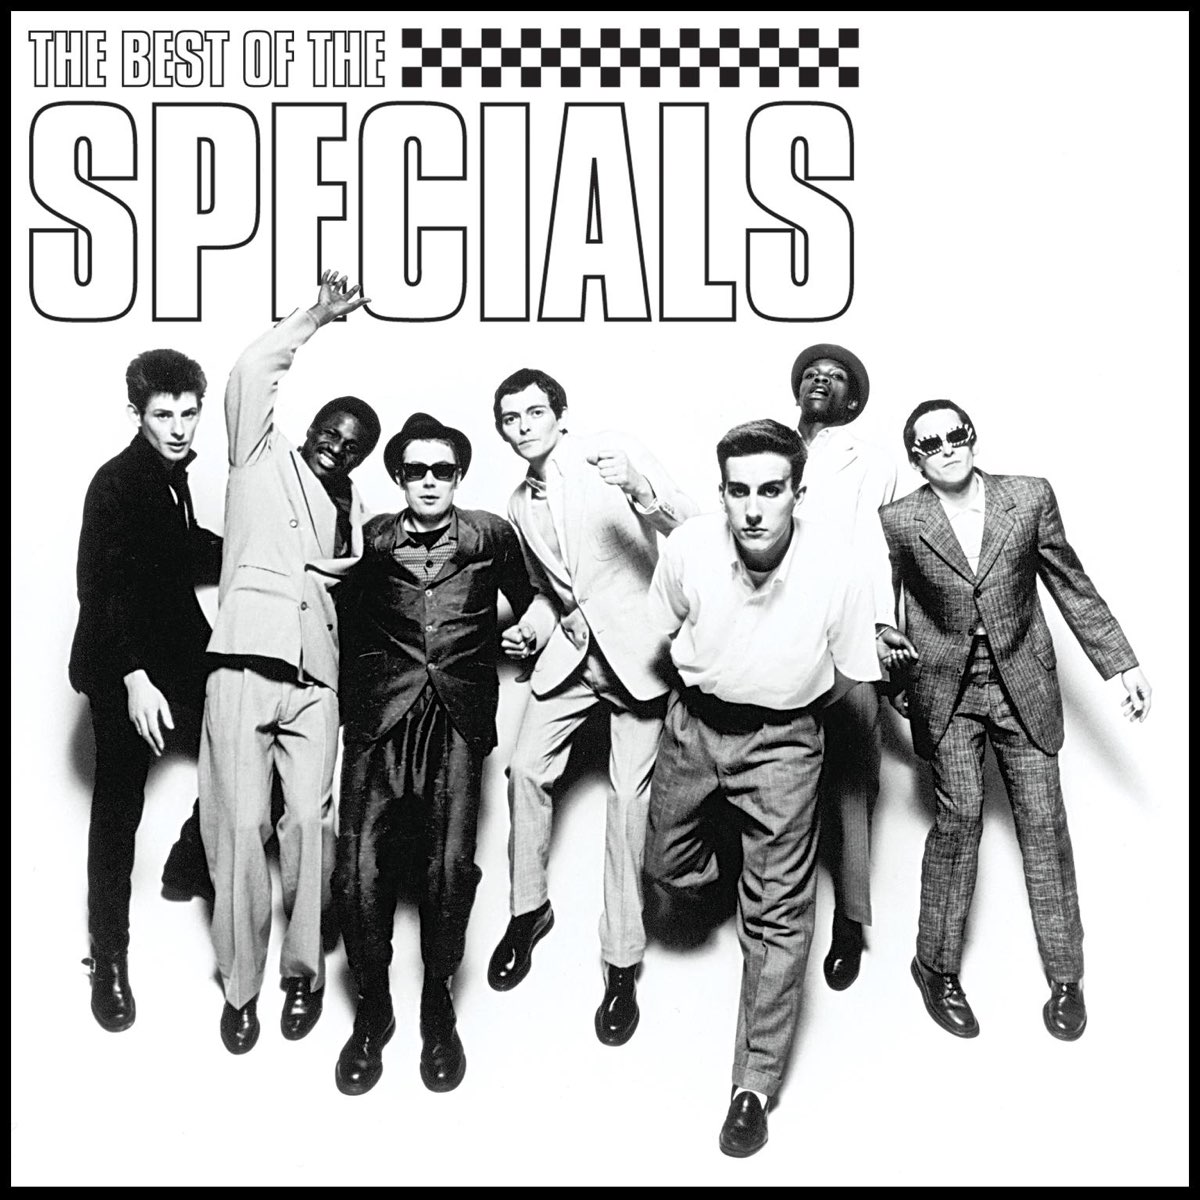 ‎The Best of the Specials by The Specials on Apple Music